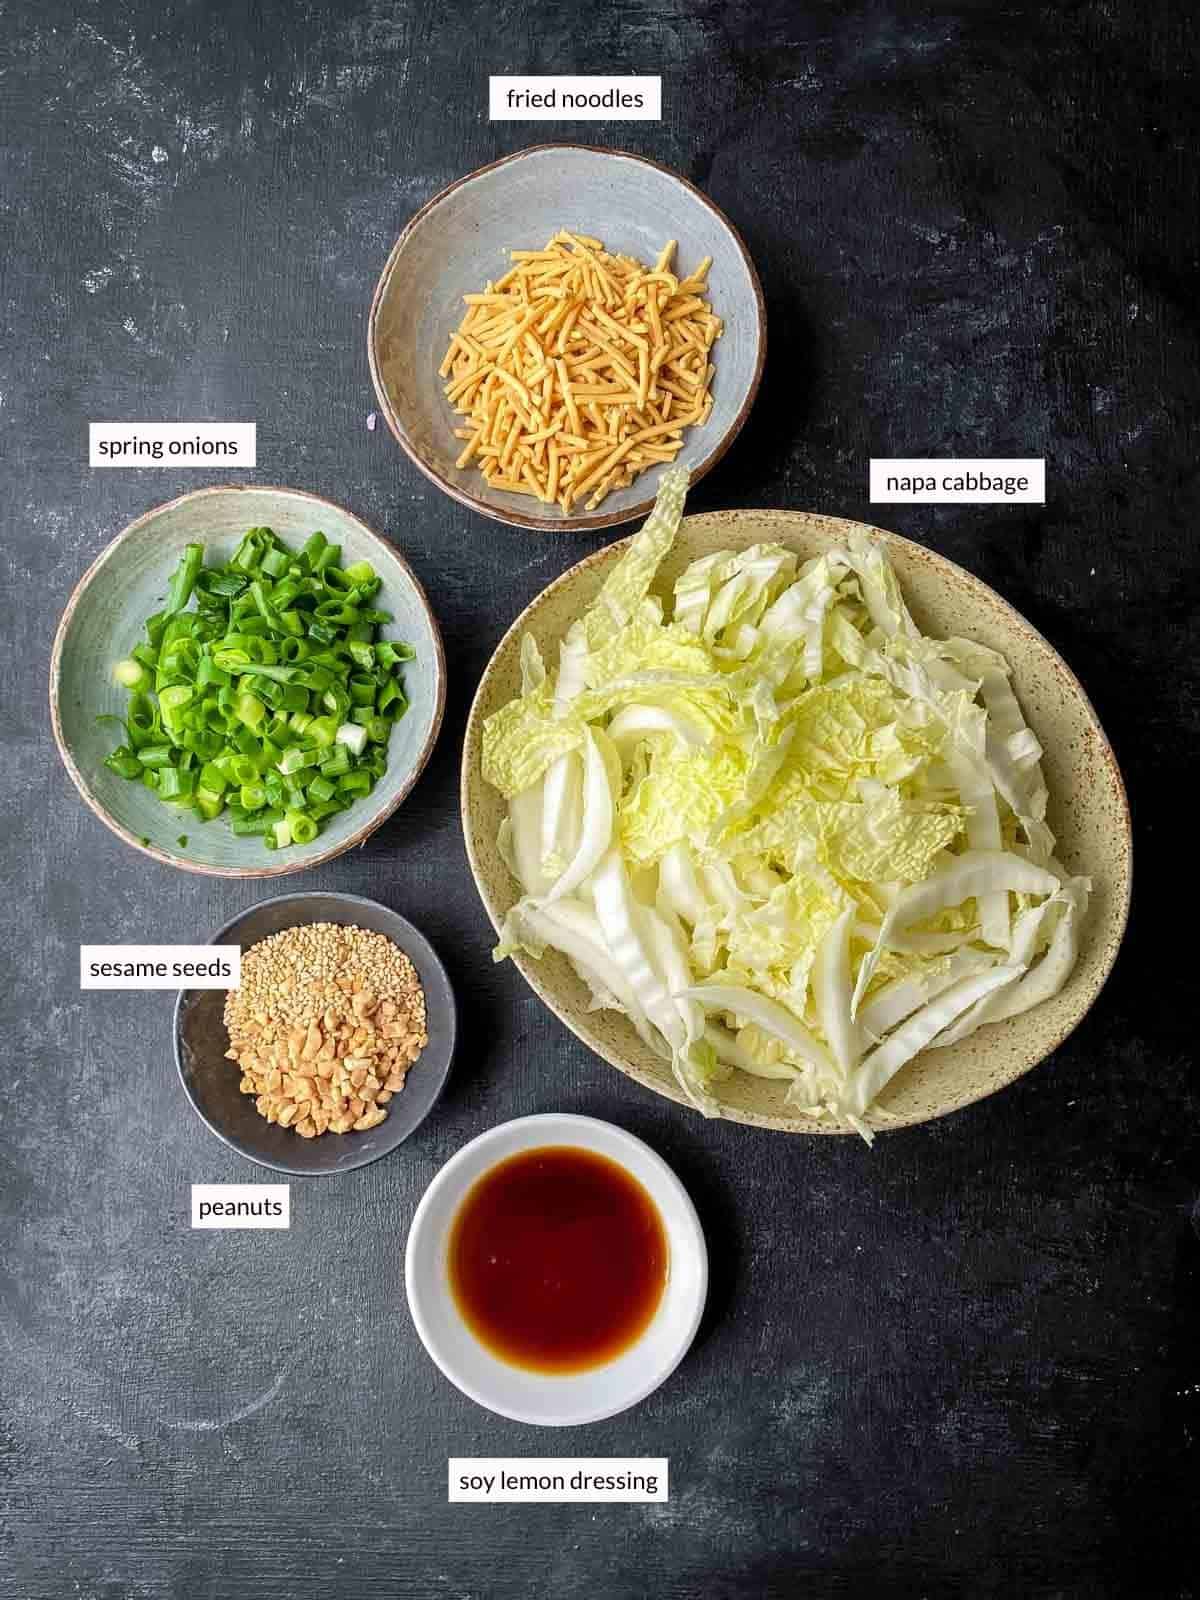 noodle salad ingredients from top to bottom: fried noodles, spring onions, napa cabbage, sesame seeds, peanuts and dressing